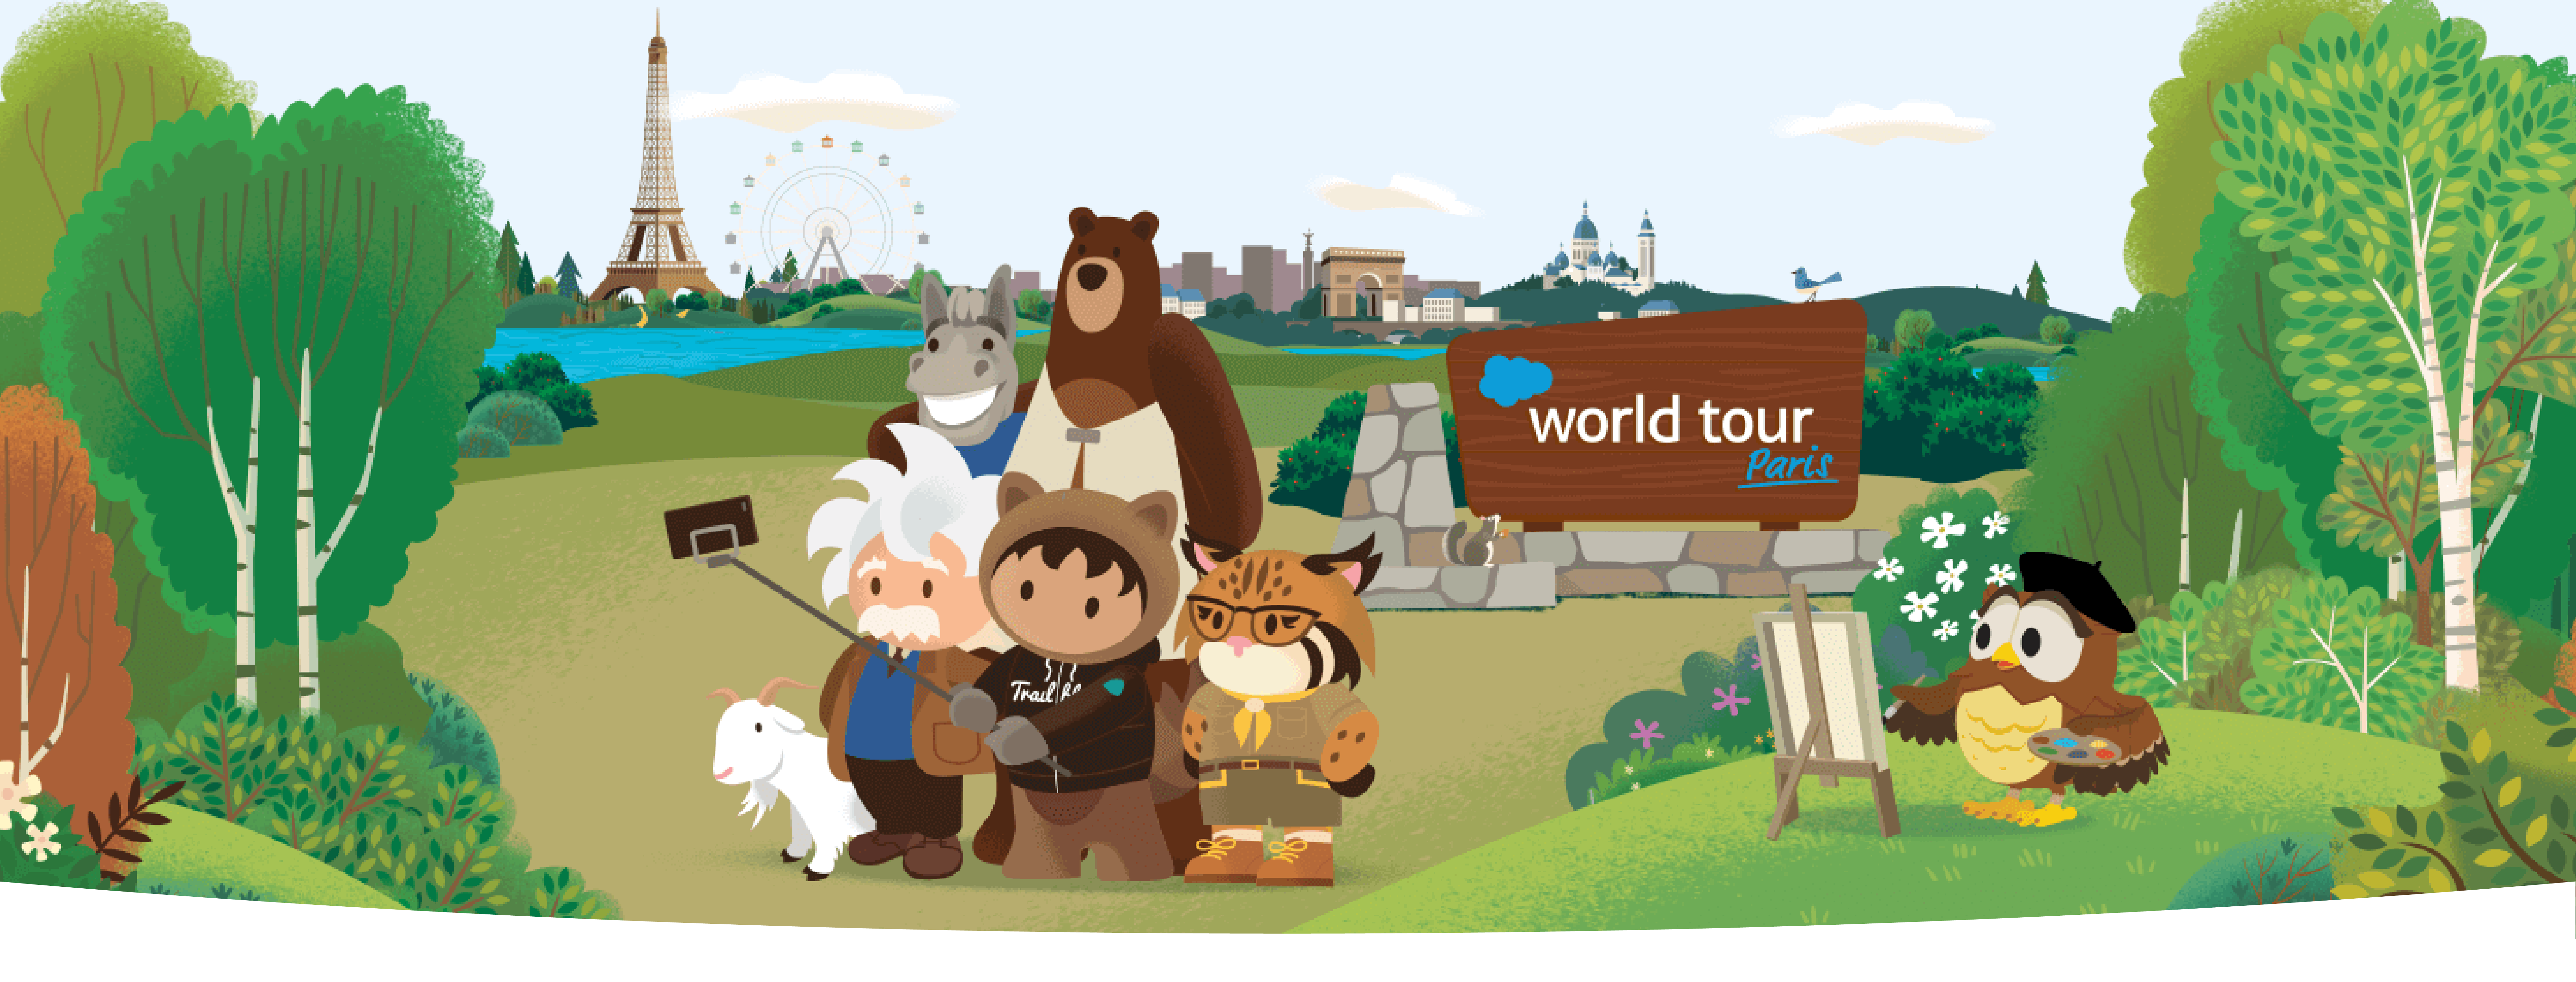 Delpha will be attending Salesforce's World Tour Paris event on May 16, 2023